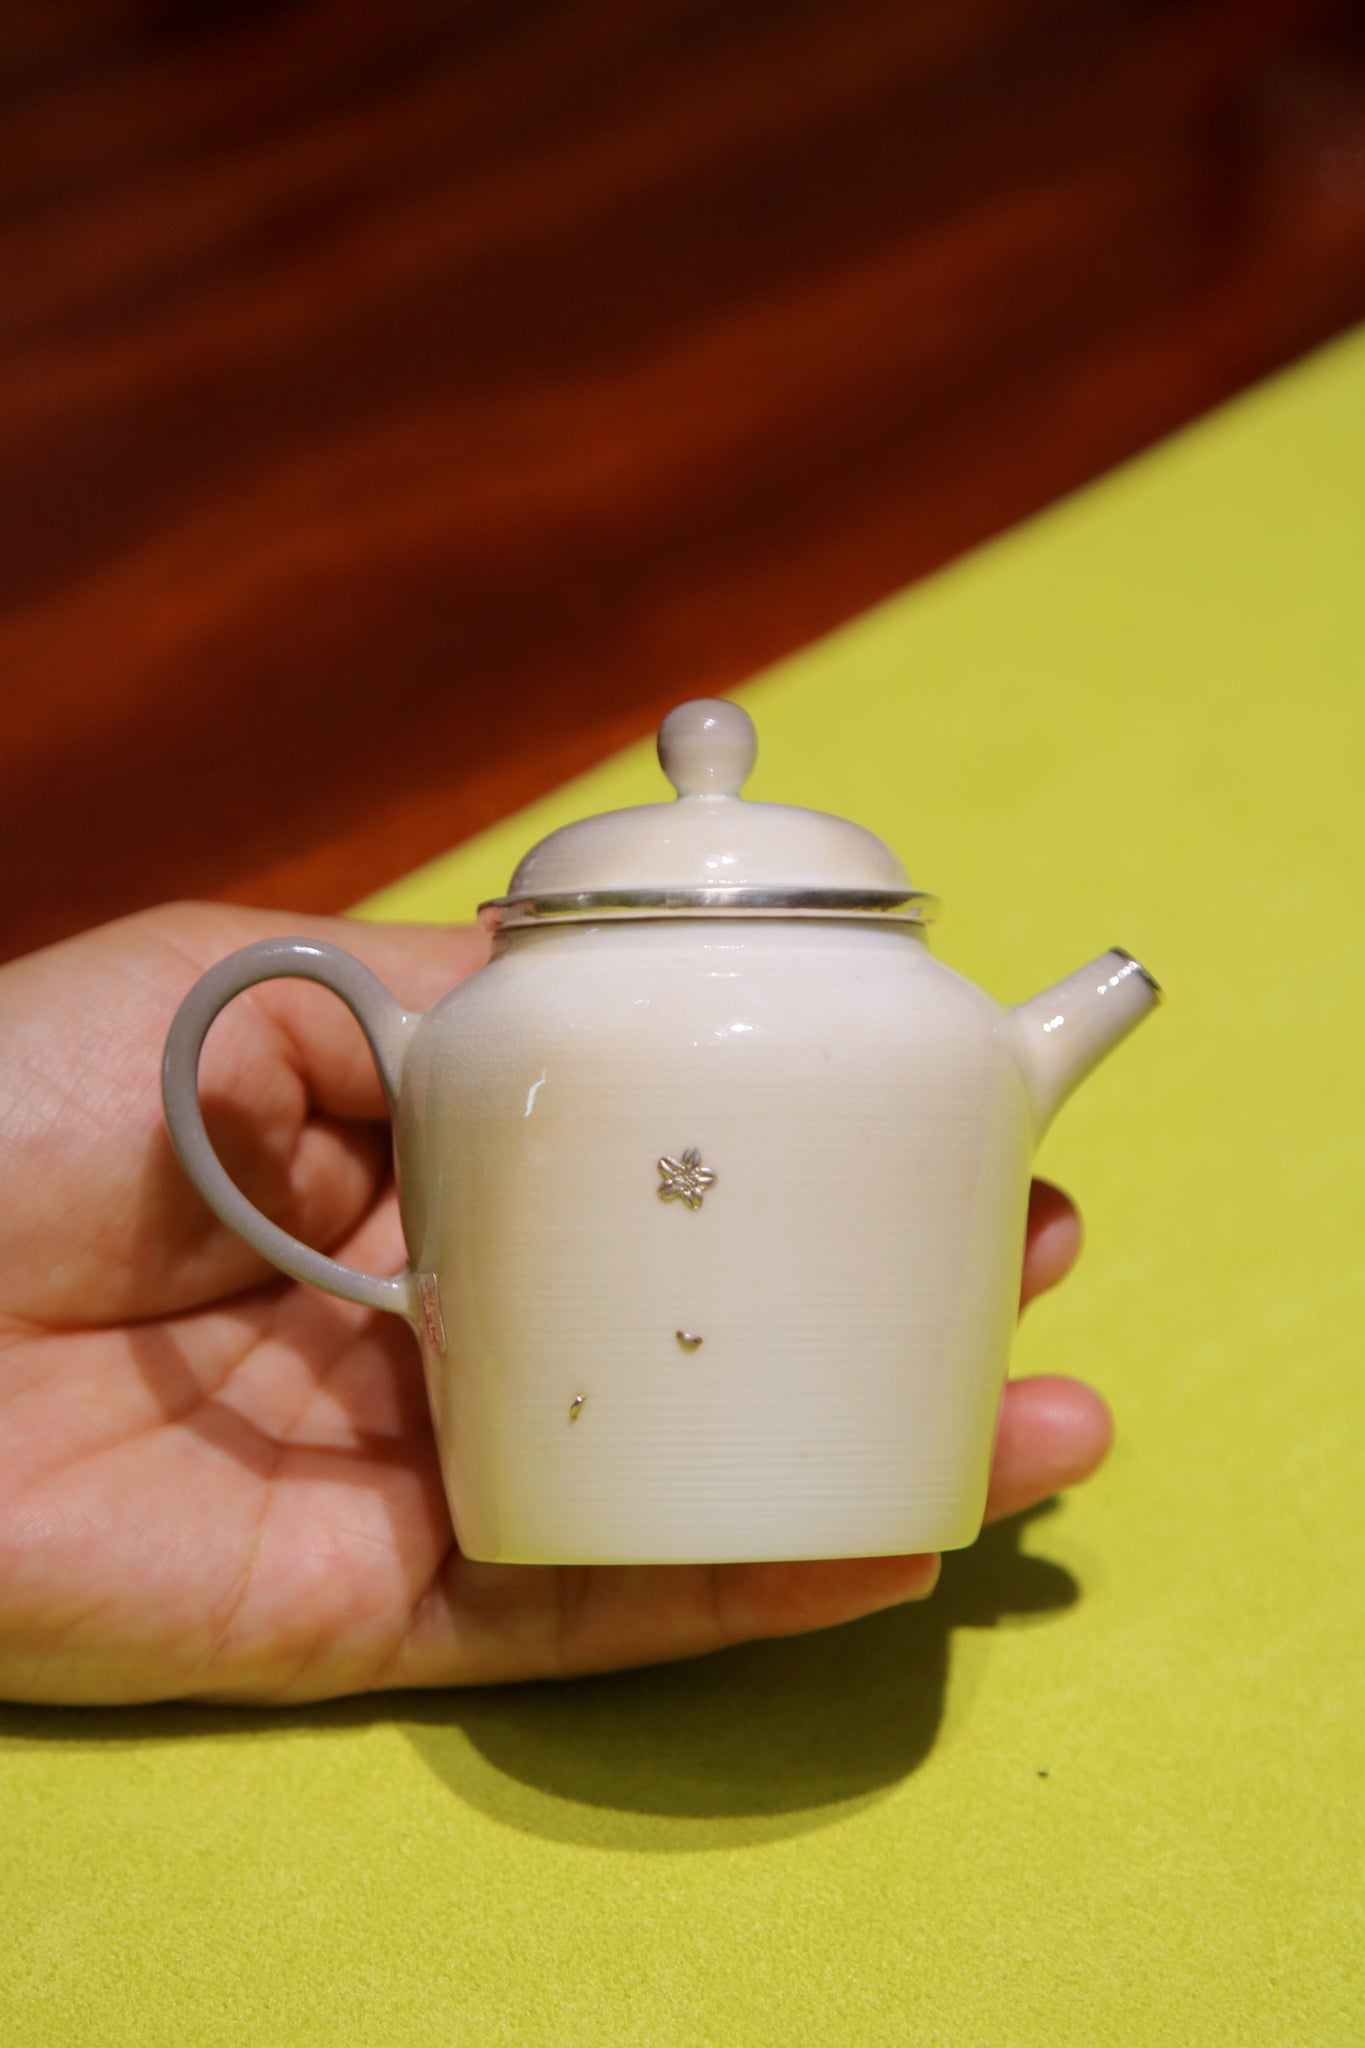 Teapot from Mr. Shao, Acajou